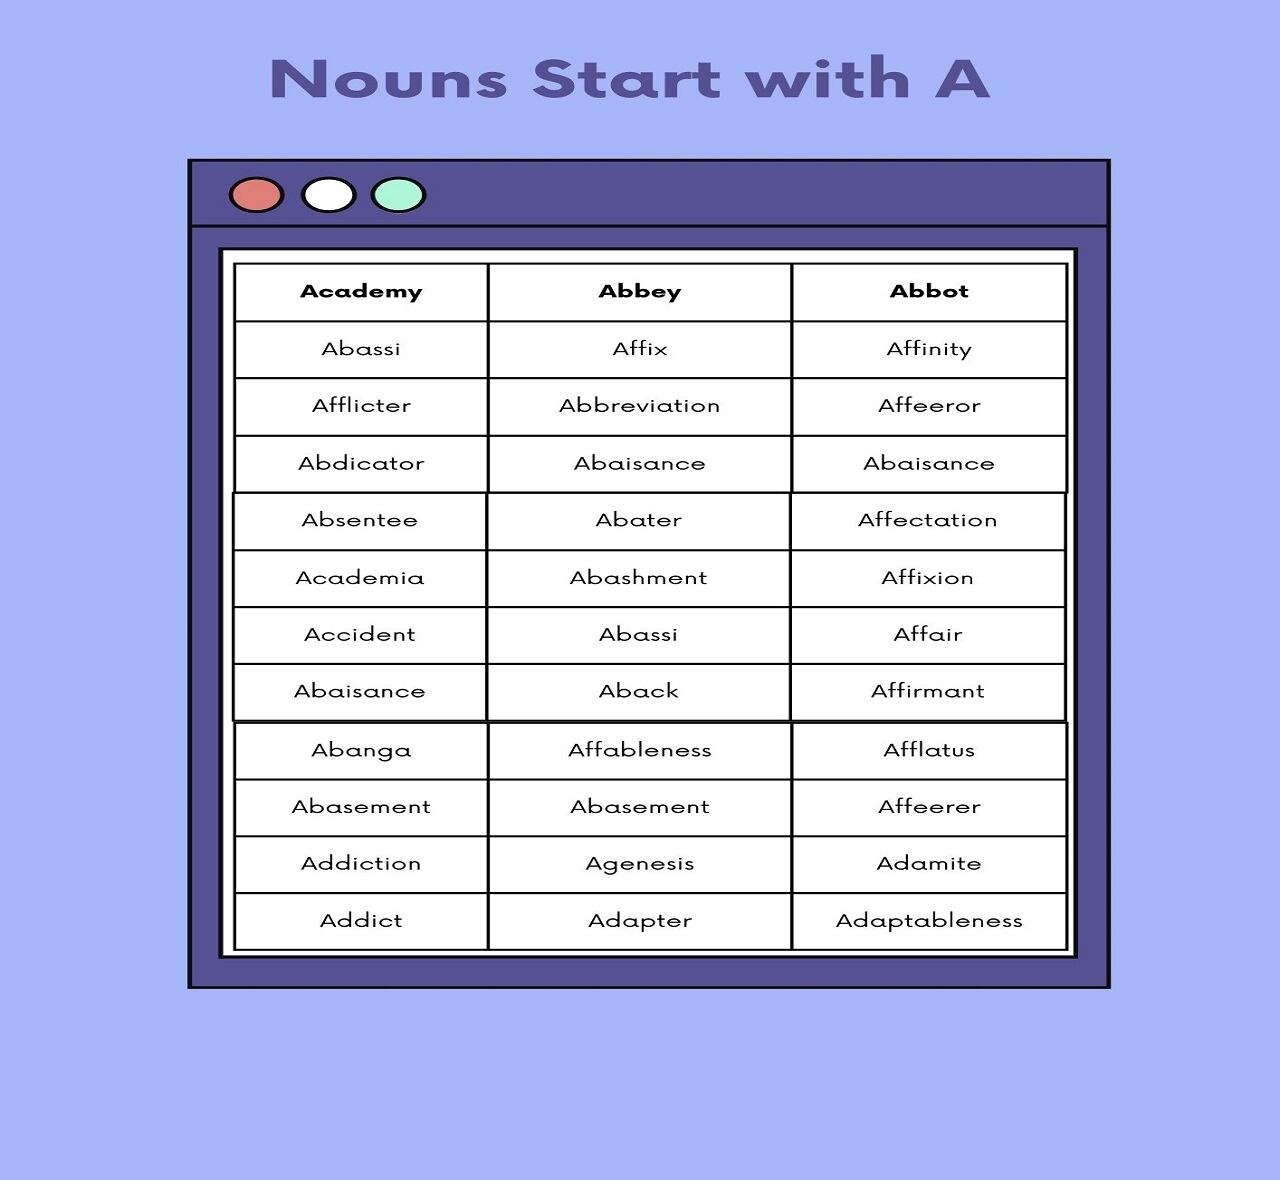 Nouns Start with A